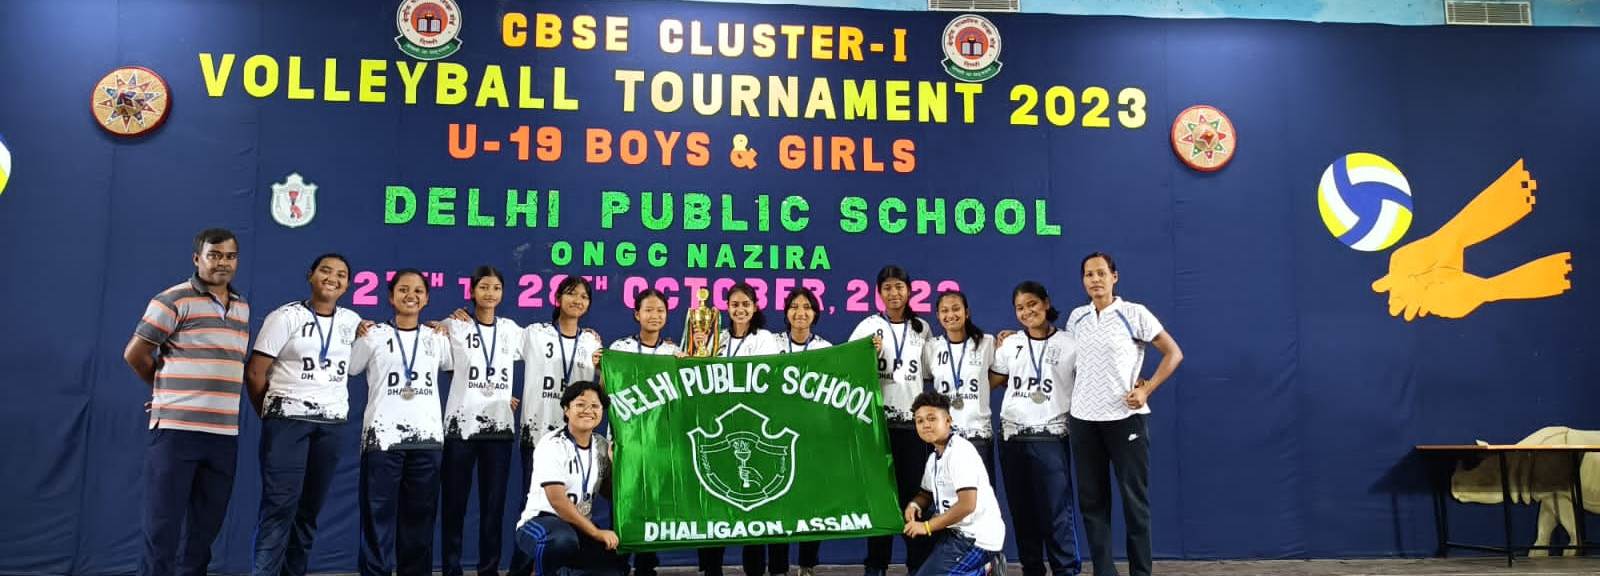 SMASHING PERFORMANCE AT INTER CBSE VOLLEYBALL TOURNAMENT, CLUSTER-I , QUALIFYING FOR THE NATIONALS AT SOLANG, H.P. VENUE: DPS ONGC NAZIRA